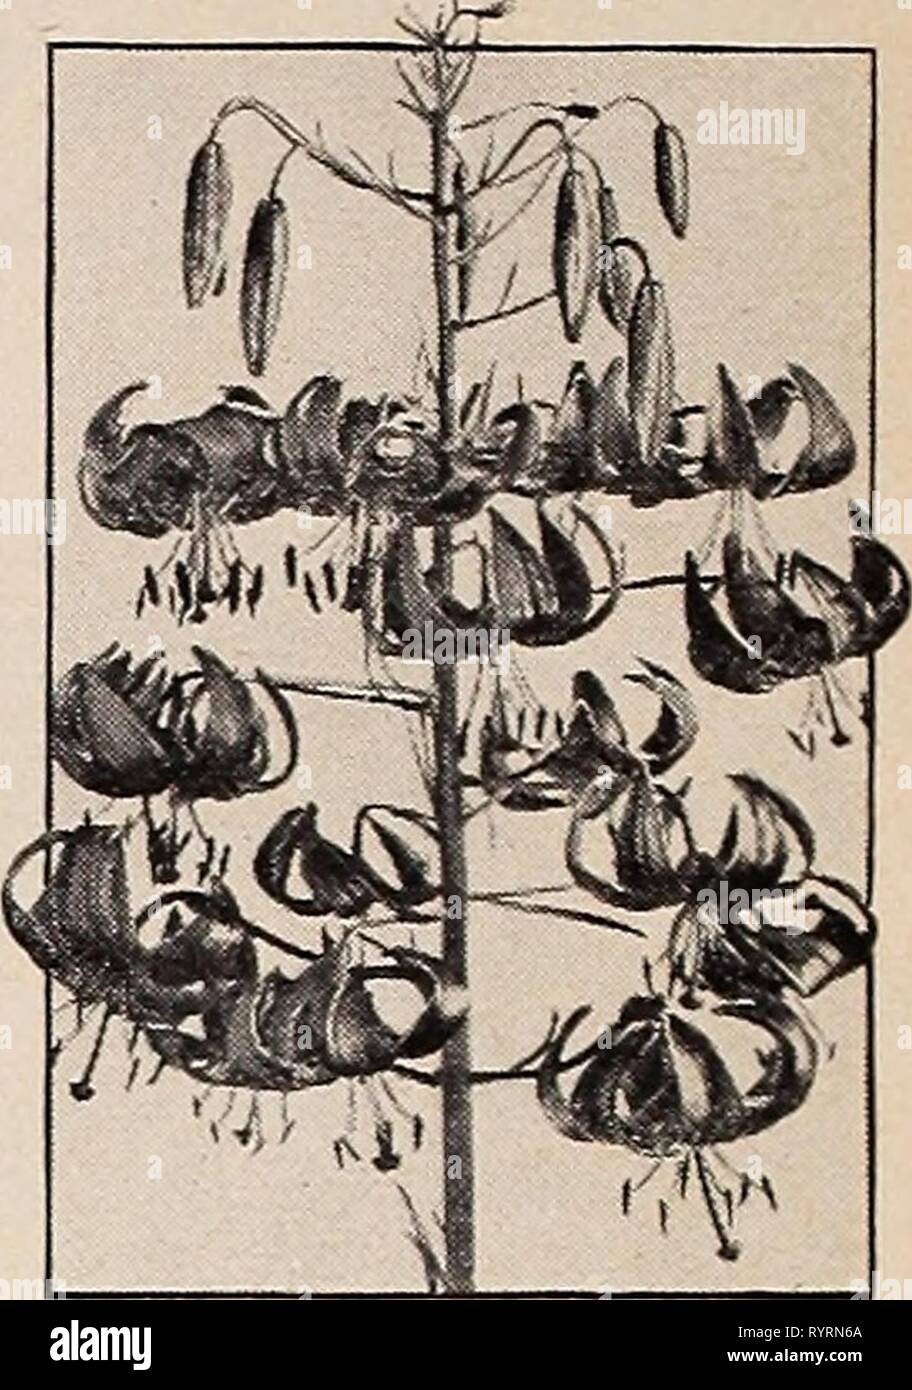 Dreer's wholesale catalog for florists Dreer's wholesale catalog for florists and market gardeners : autumn 1940 edition . dreerswholesalec1940henr 0 Year: 1940  Helenium Double Hollyhock Lilium tenuifolium Helenium—Helen's Flower Strong-g^rowing hardy perennials giving an enormous crop of flowers in late summer. Tr. pkt. Vi Oz. Autumnale Superbum. Golden yellow flowers; 5 to 6 ft $0 50 $1 00 Blverton Oem. Old gold changing to Wallflower red 50 1 00 Helianthemum—Rock or Sun Rose Uutabile, exceedingly pretty, low-growing evergreen plants forming broad clumps, and which during their flowering se Stock Photo